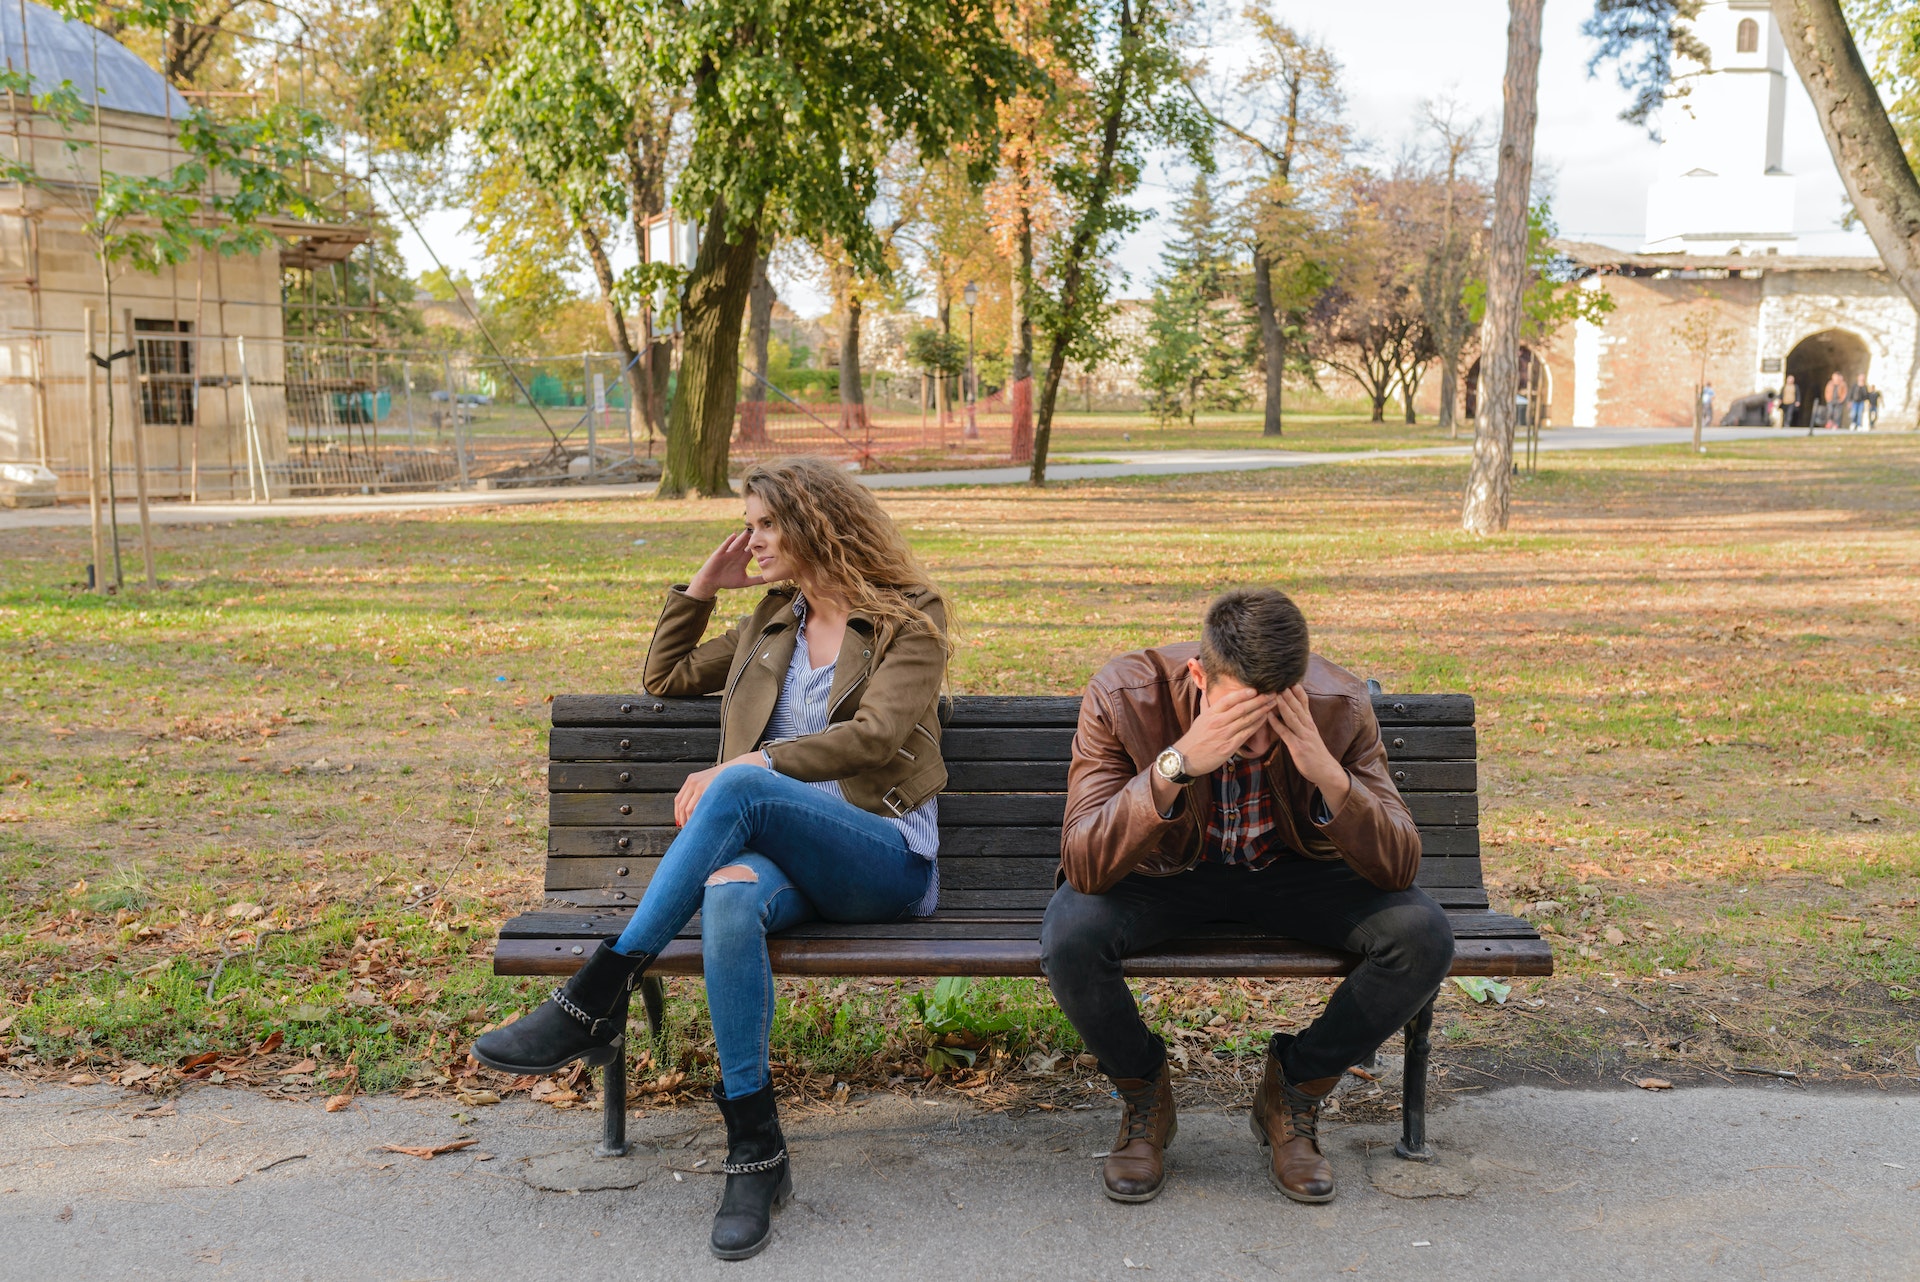 A man and woman sitting on a bench | Source: Pexels